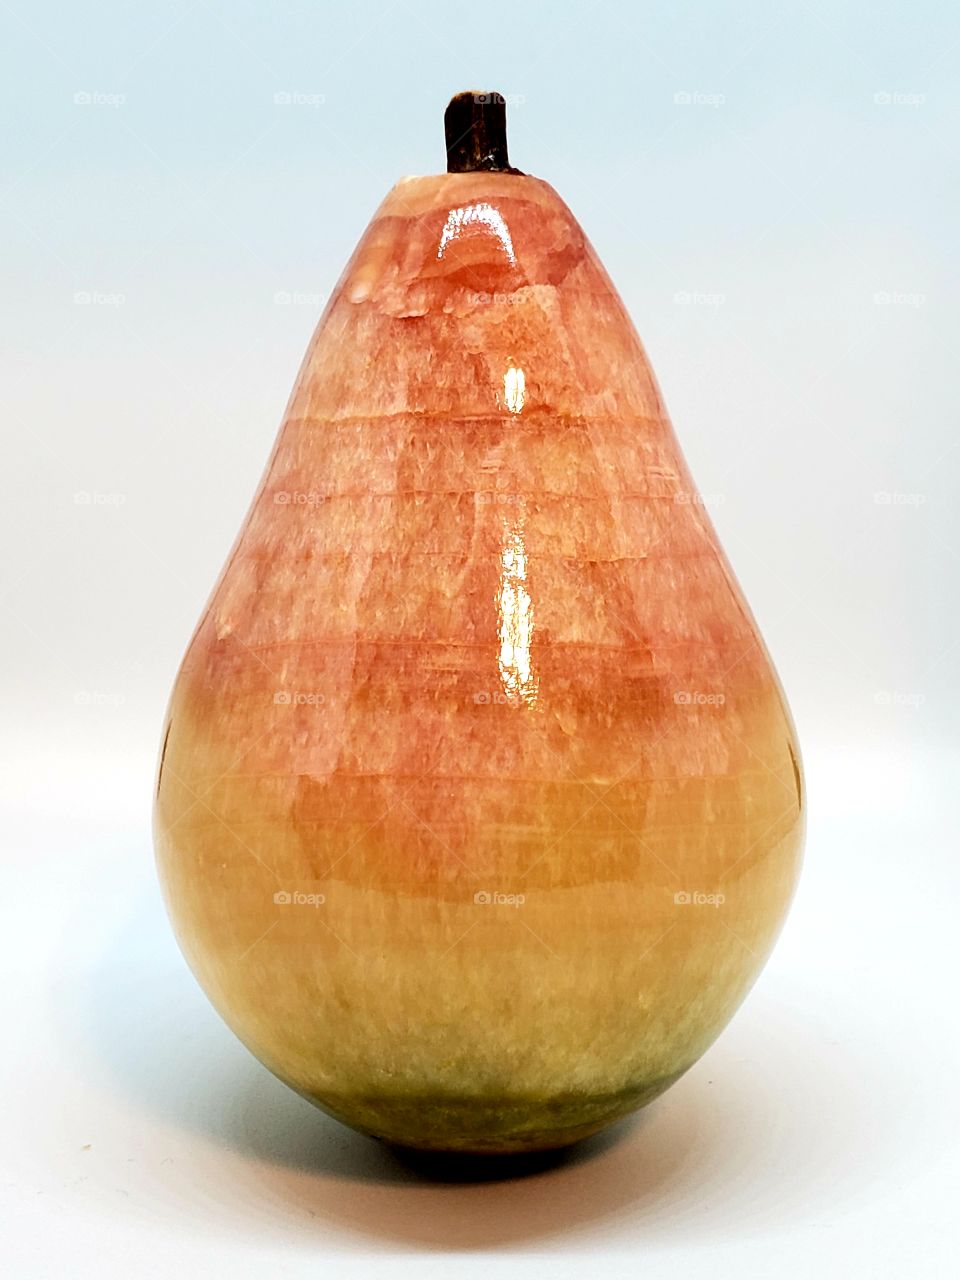 Stone Pear with muted and blended colors.